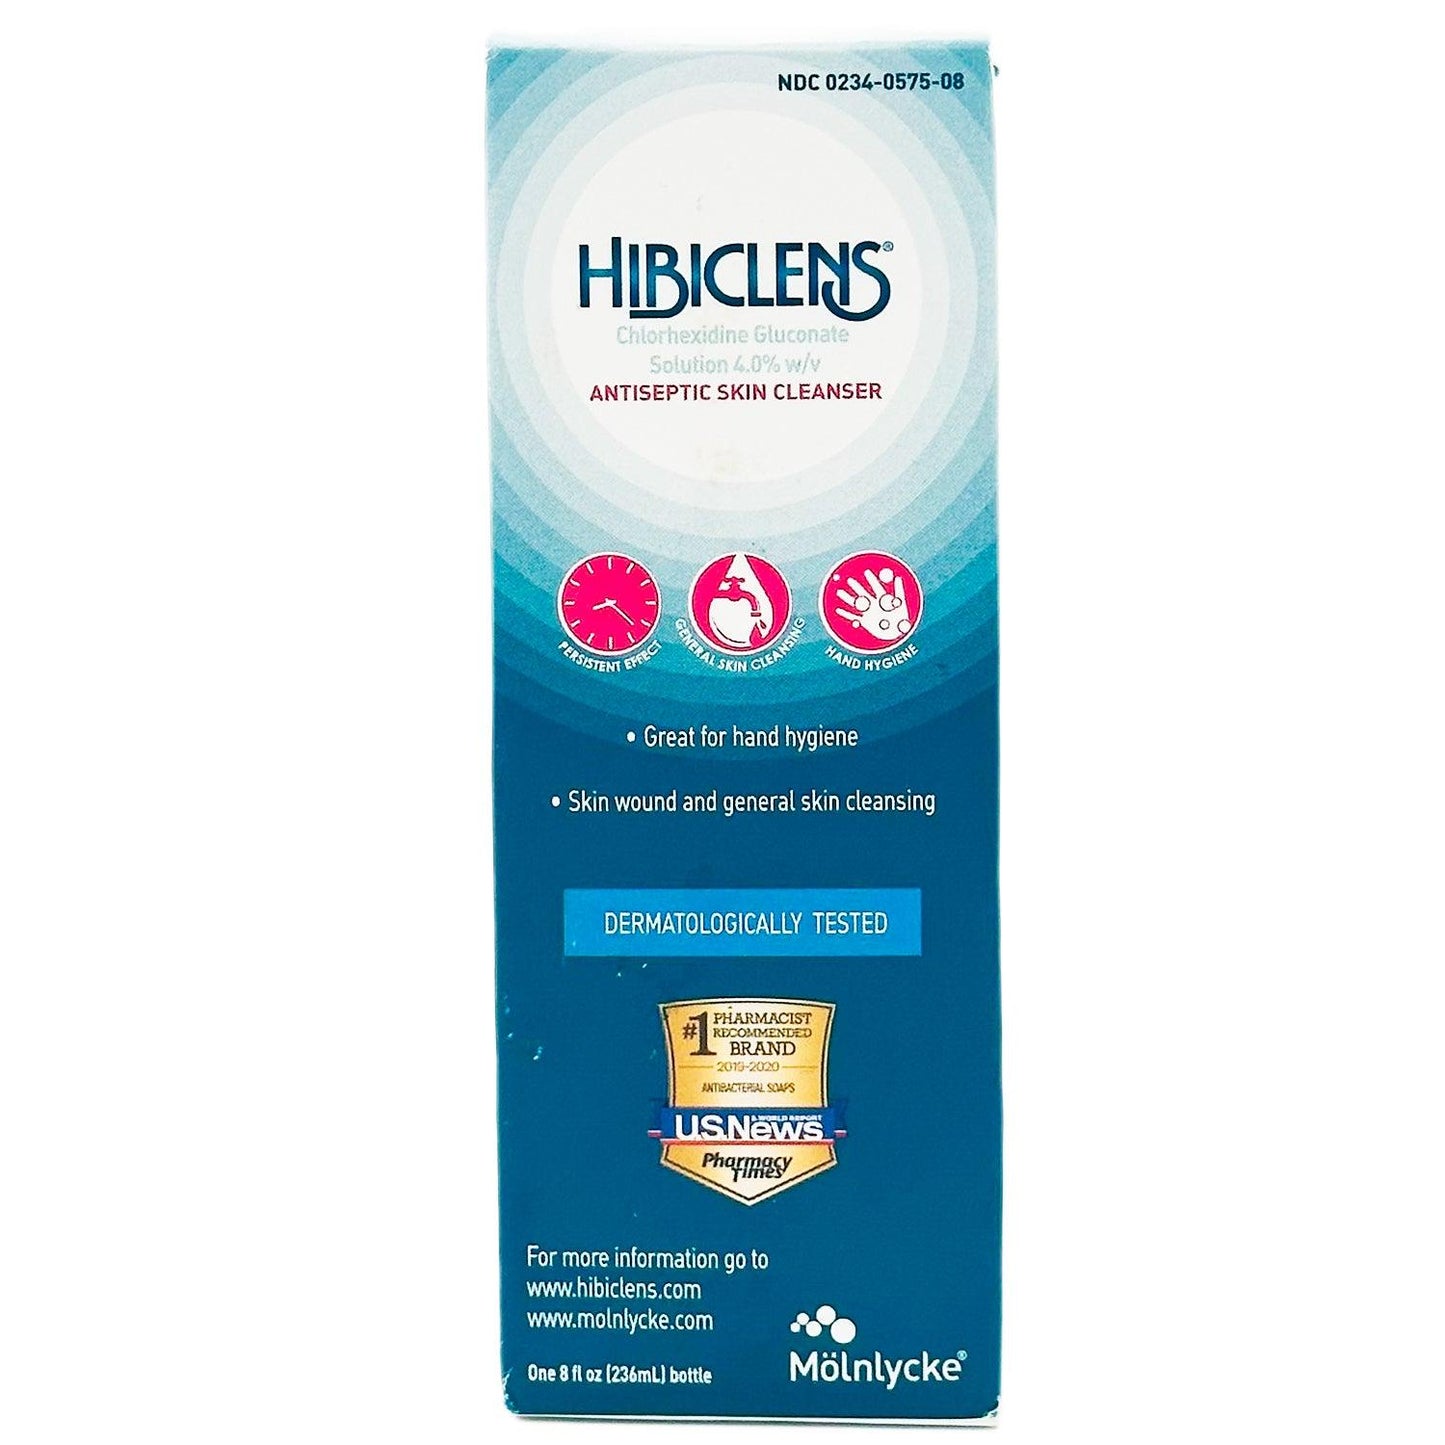 Hibiclens Antiseptic Skin Cleanser Helps Reduce Bacteria 8 FL OZ | BEST BY 02/23 - Home Revival Shop